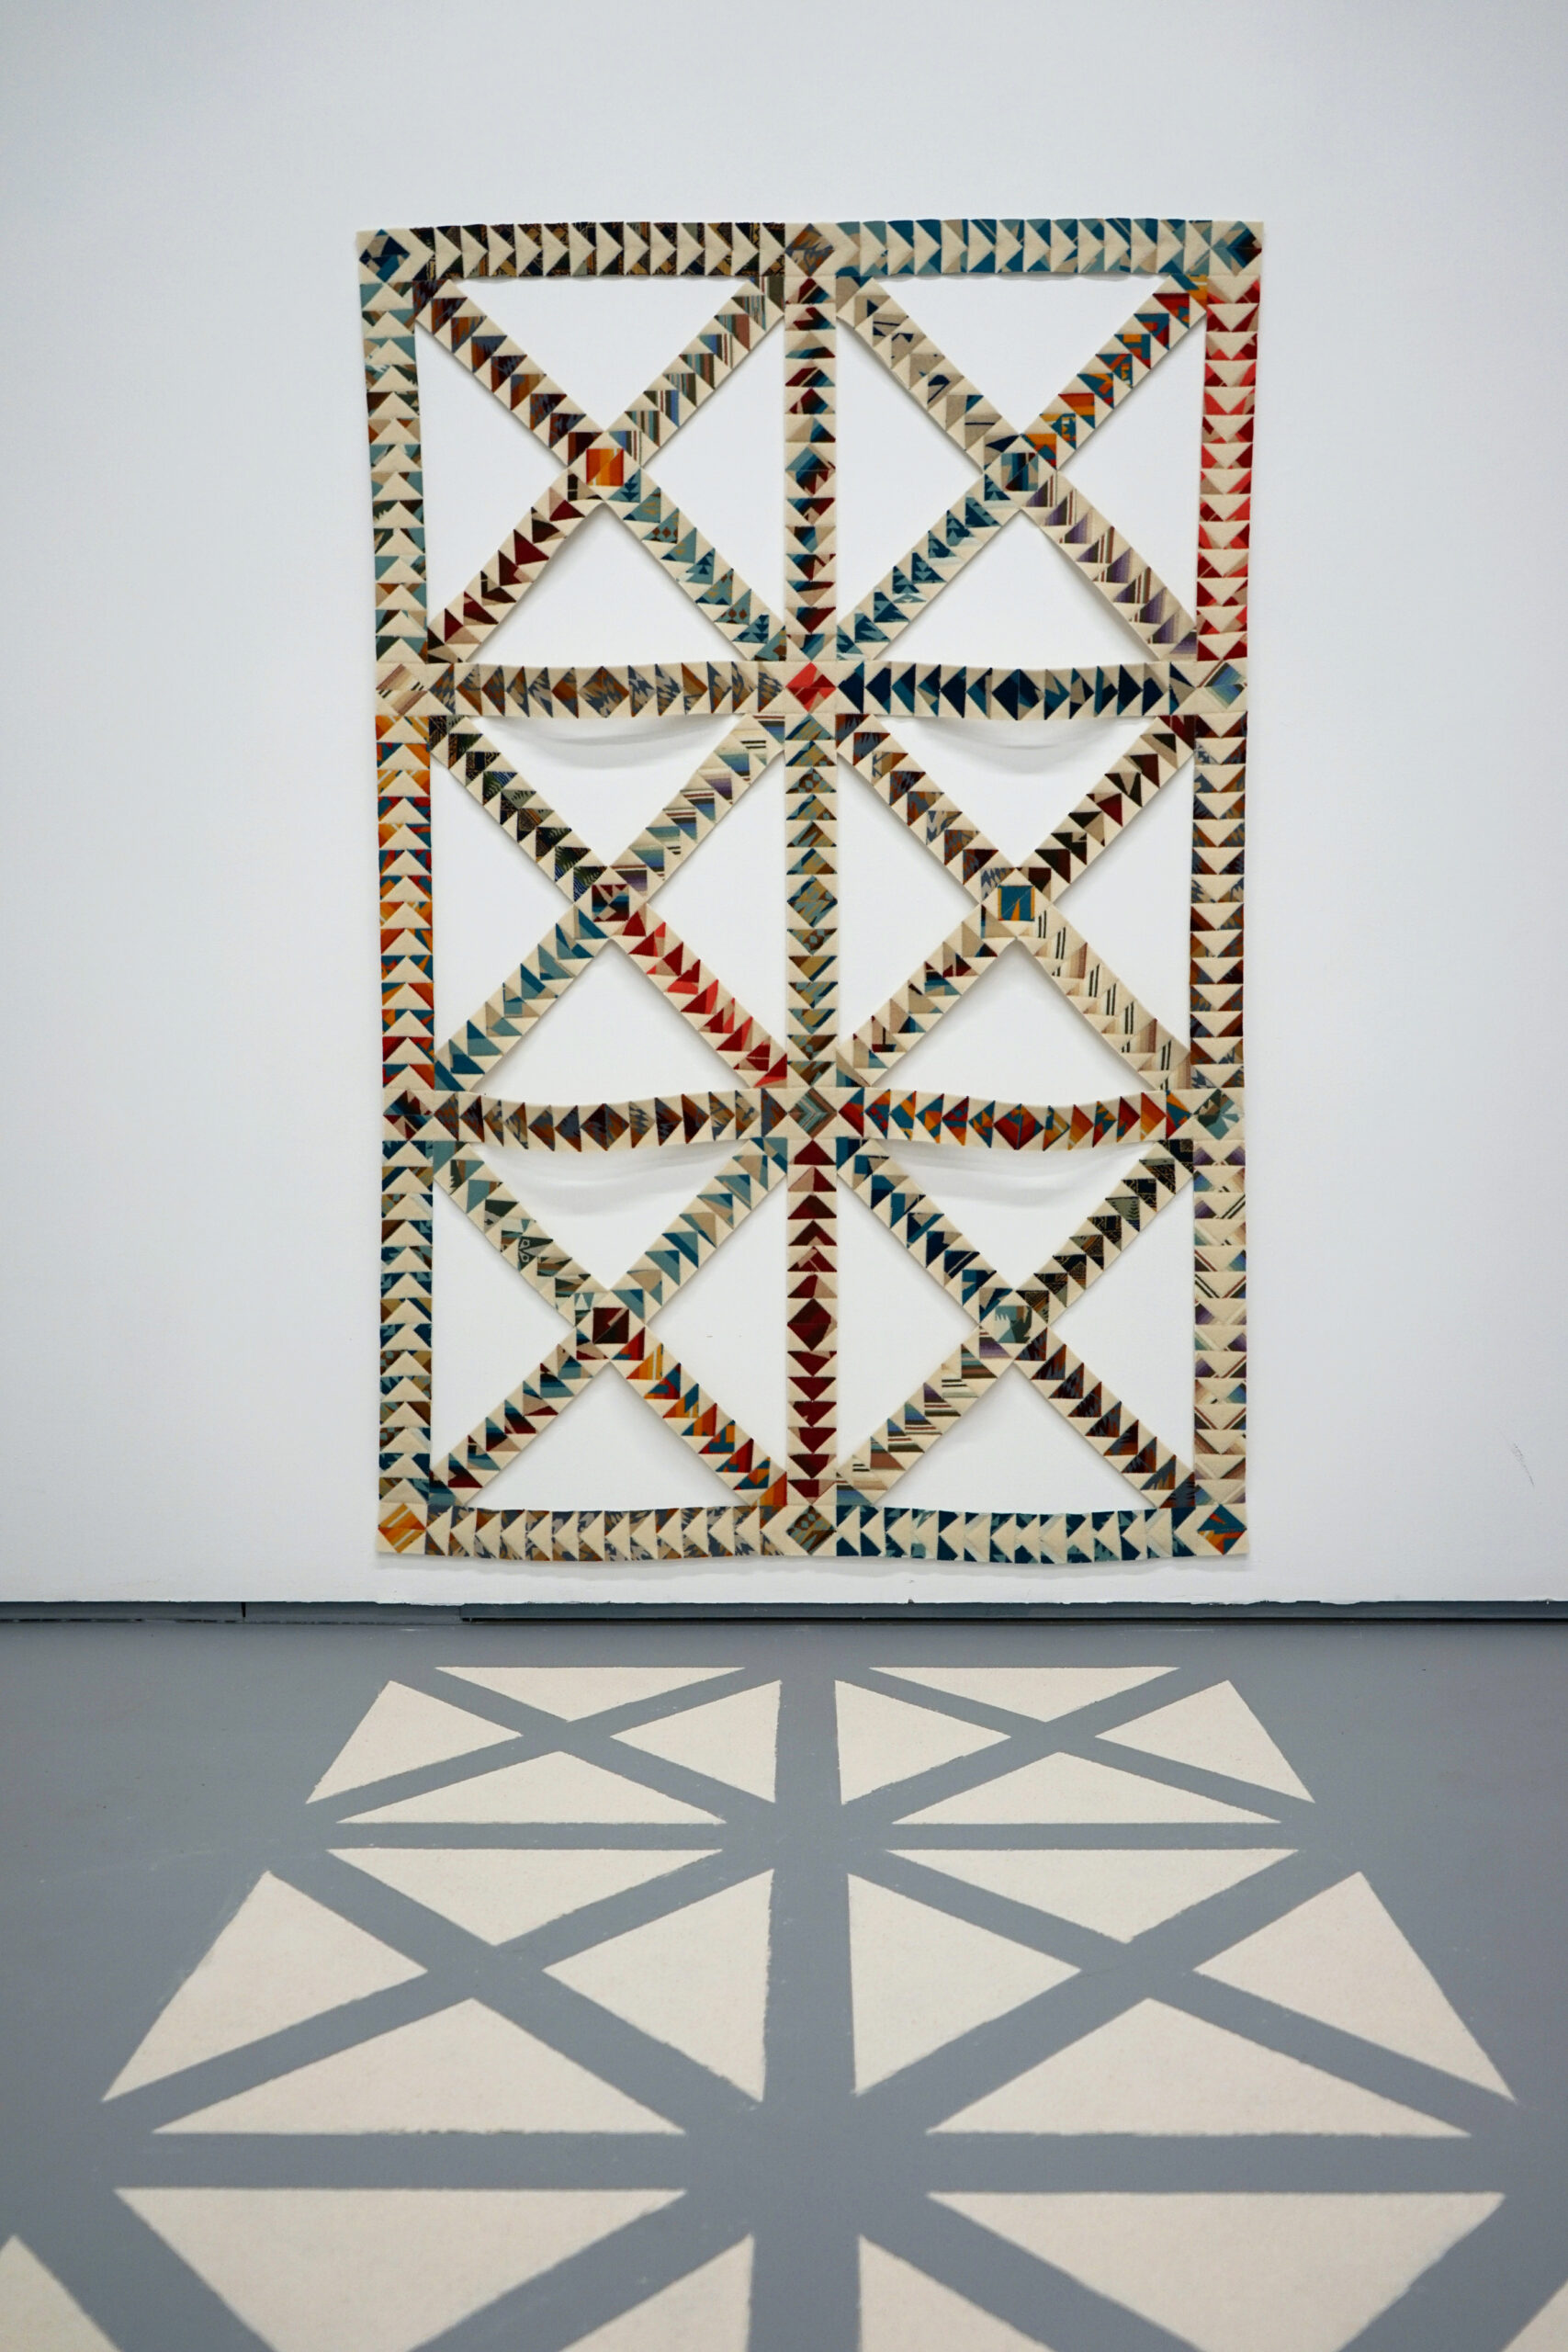 fabric lattice resembling empty quilt blocks on the wall, with flour on the floor in front of it laid out in the pattern of the missing sections